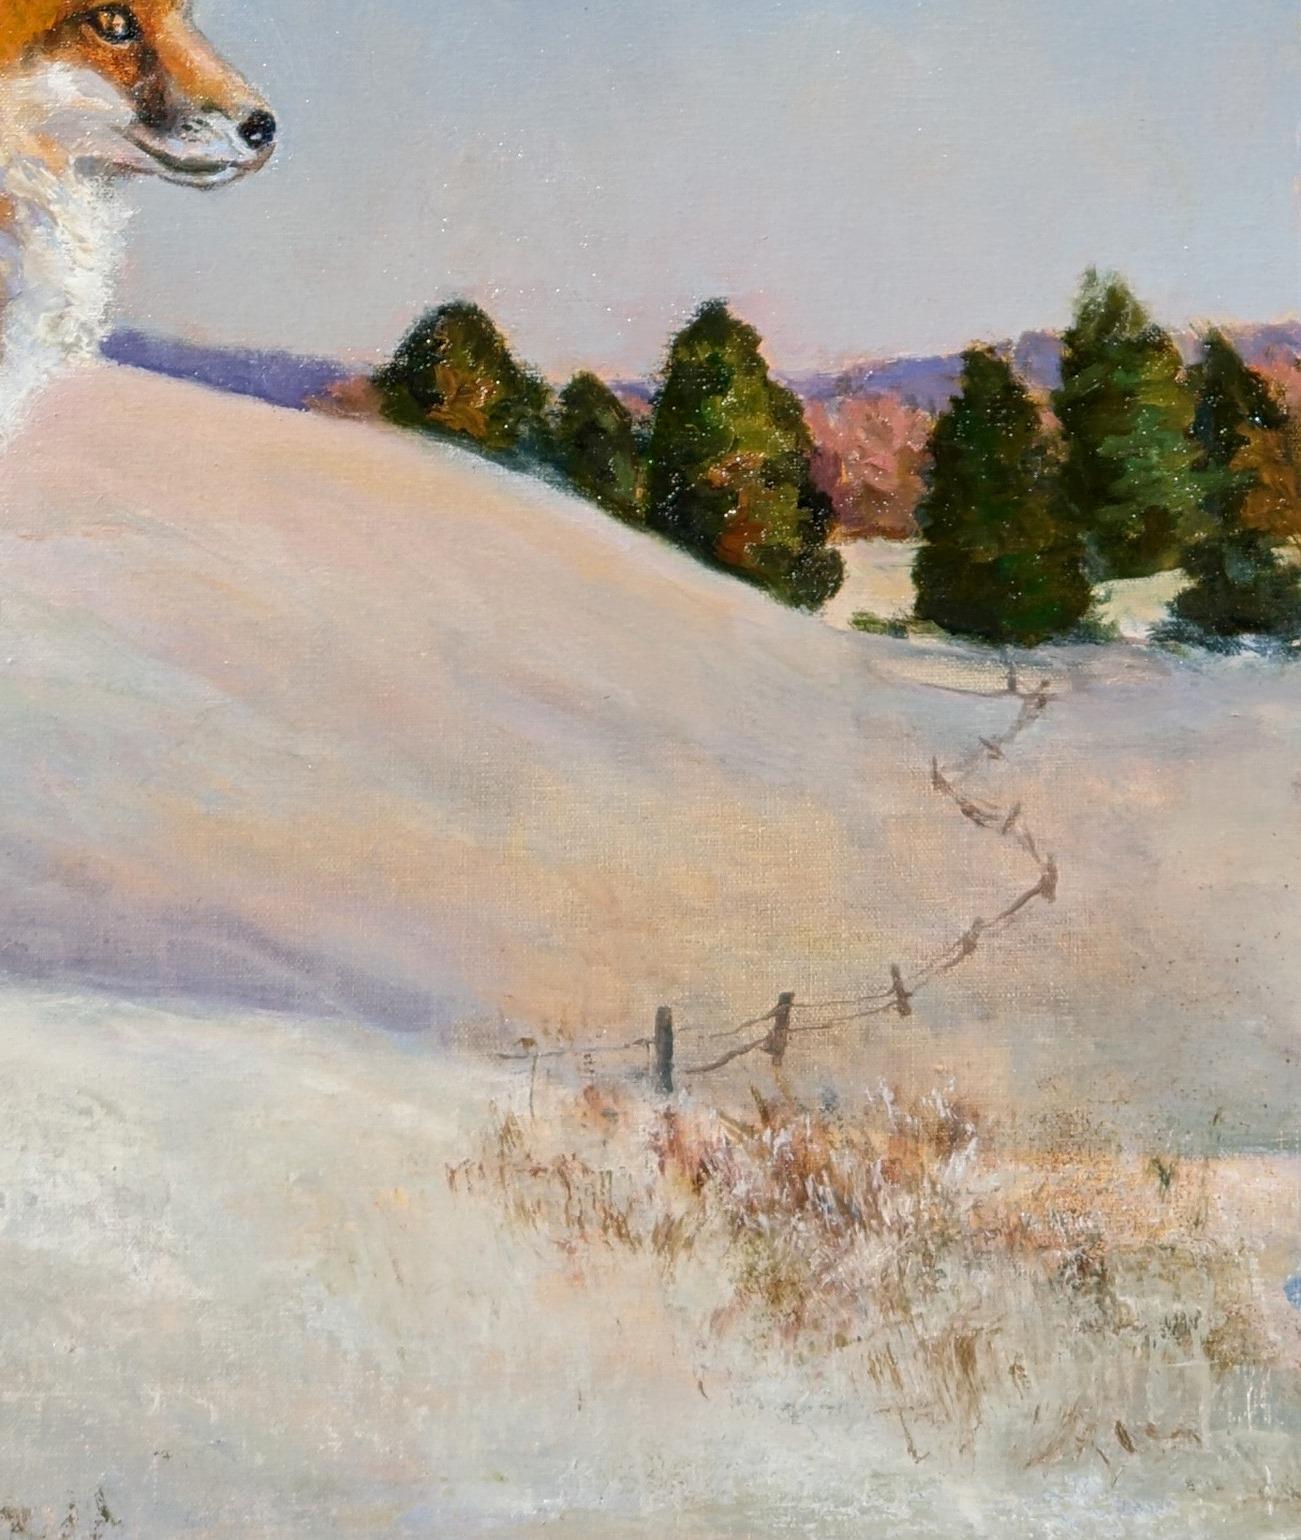 Reynard Fox Painting in Snowy Winter Landscape Celebrates the Fox's Cunningness For Sale 2